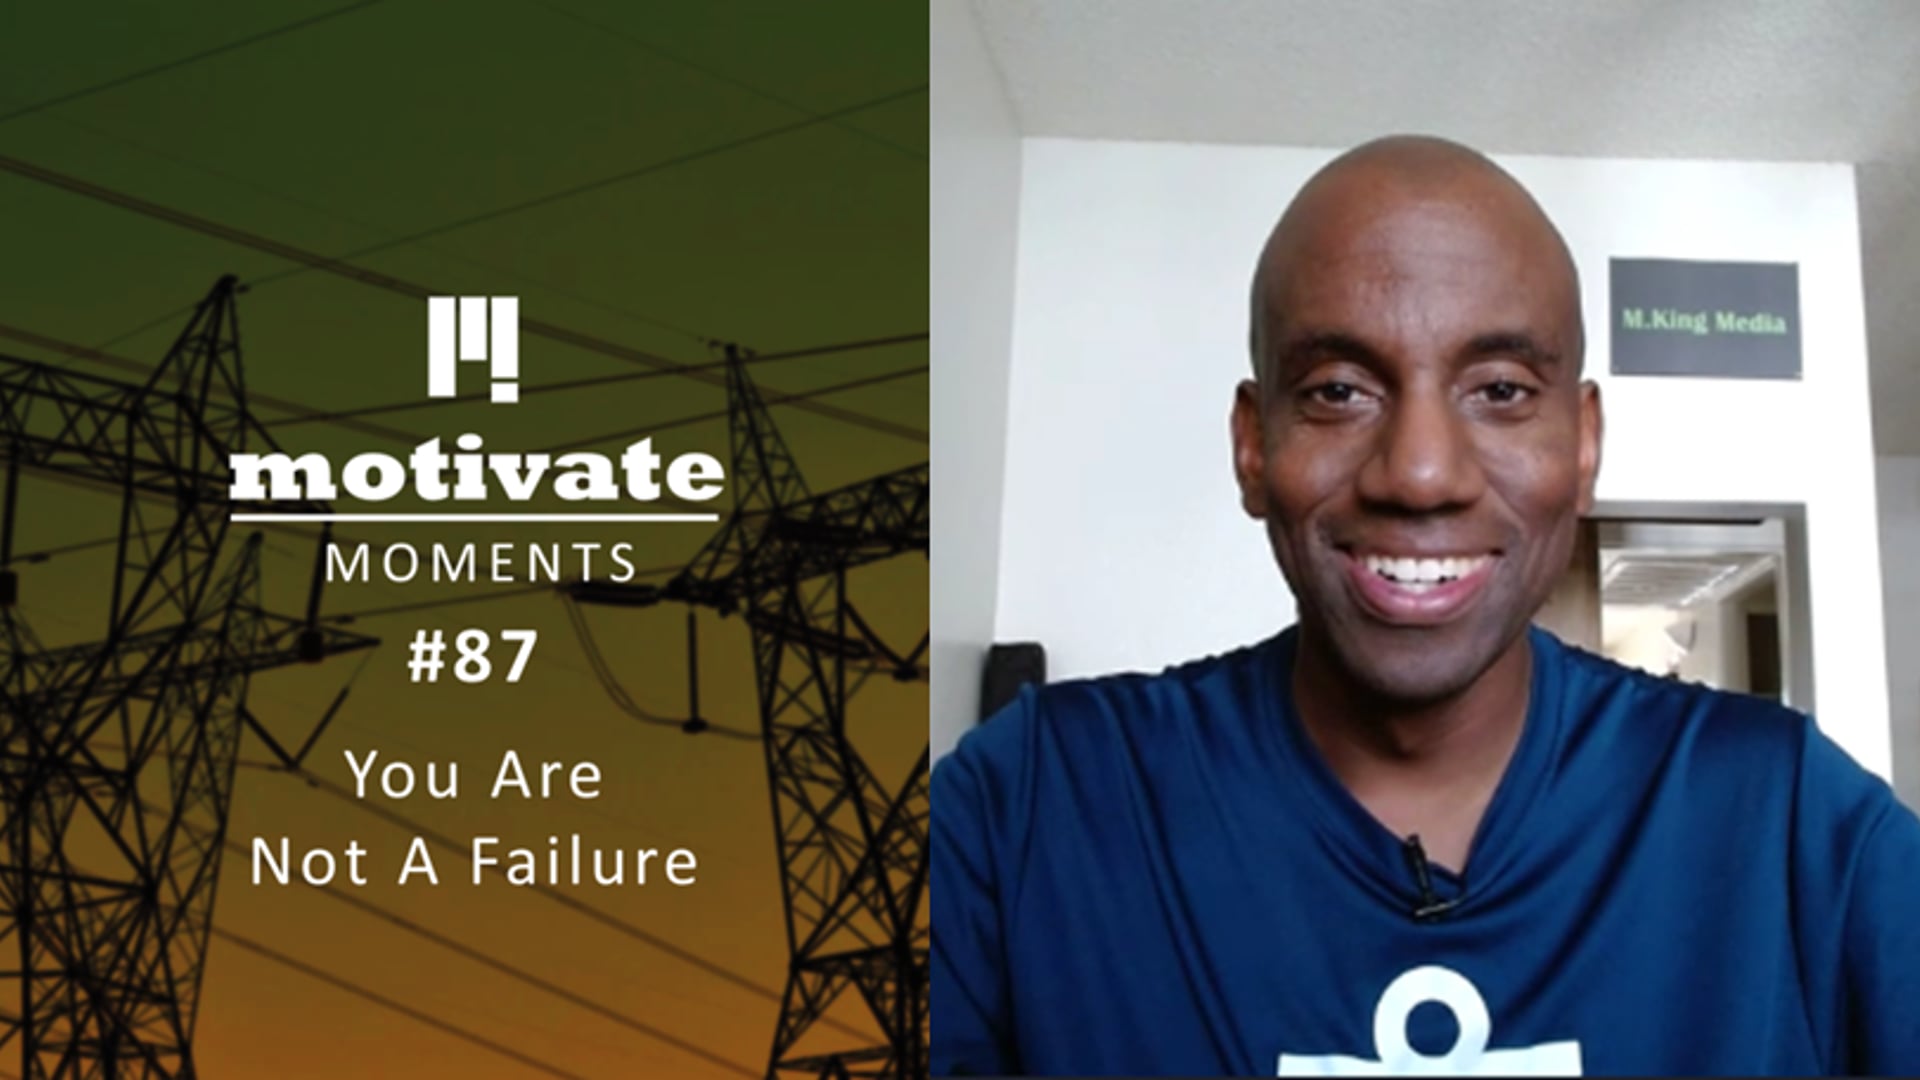 Motivate Moments #87: You Are Not A Failure